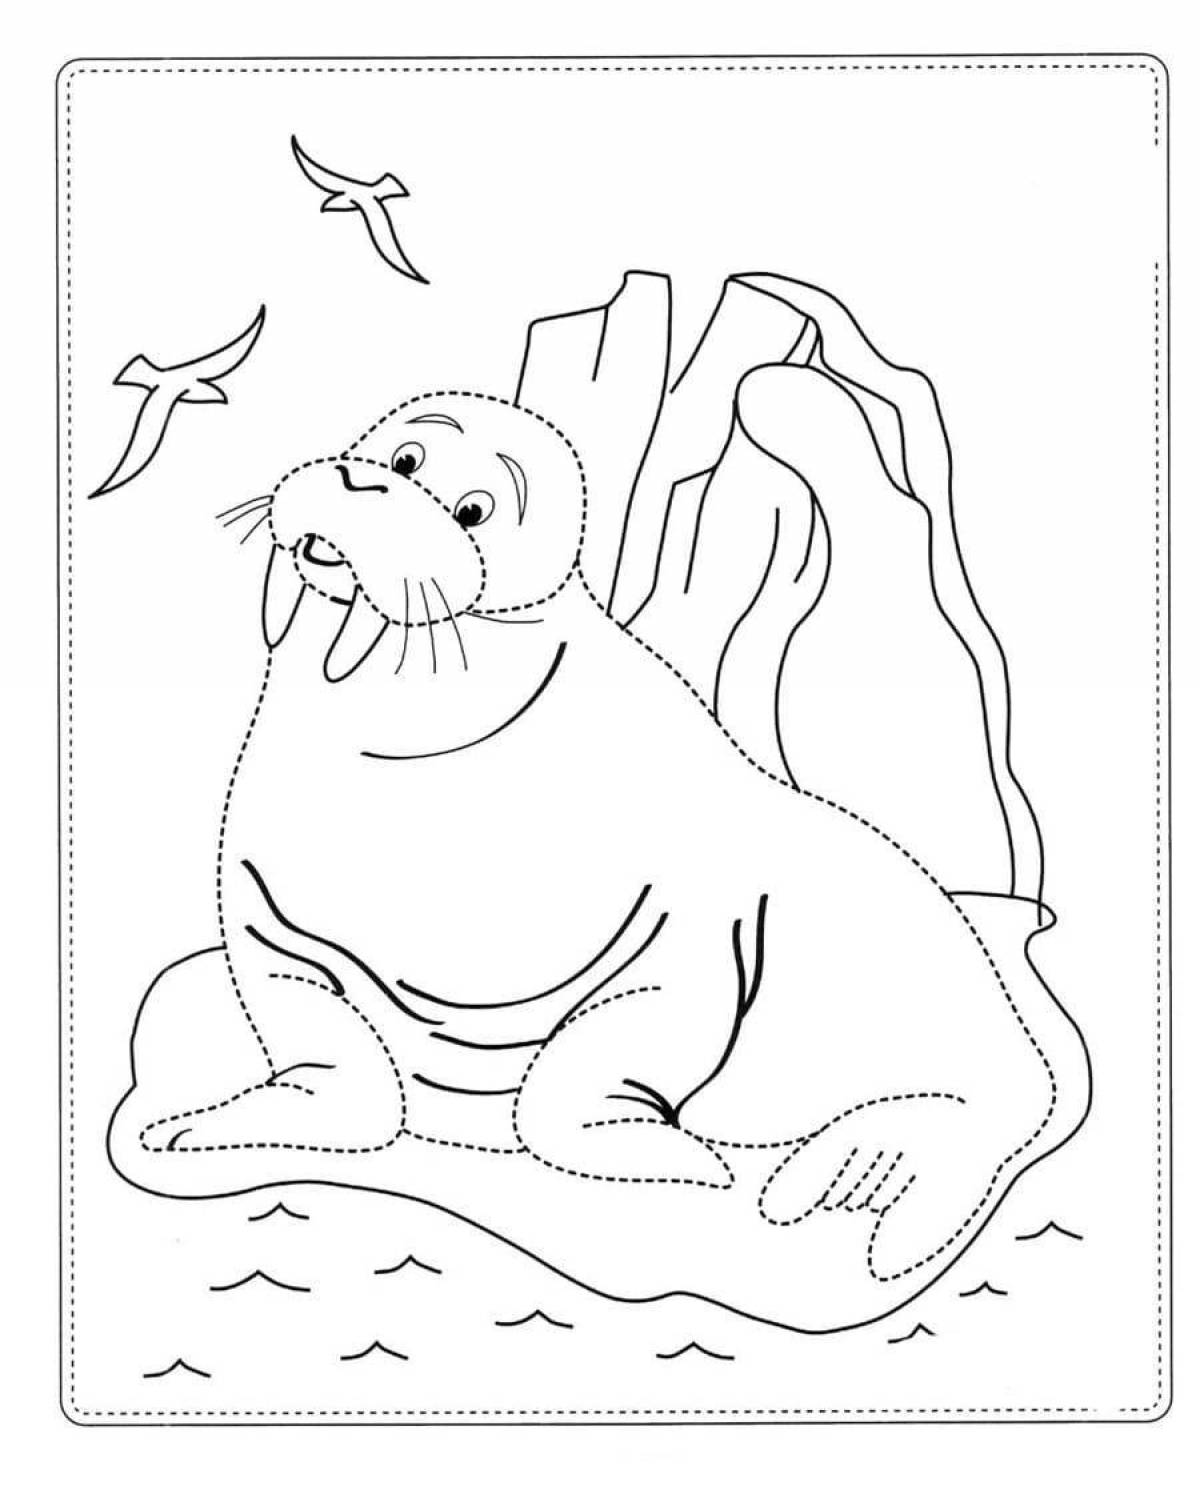 Adorable walrus coloring book for kids